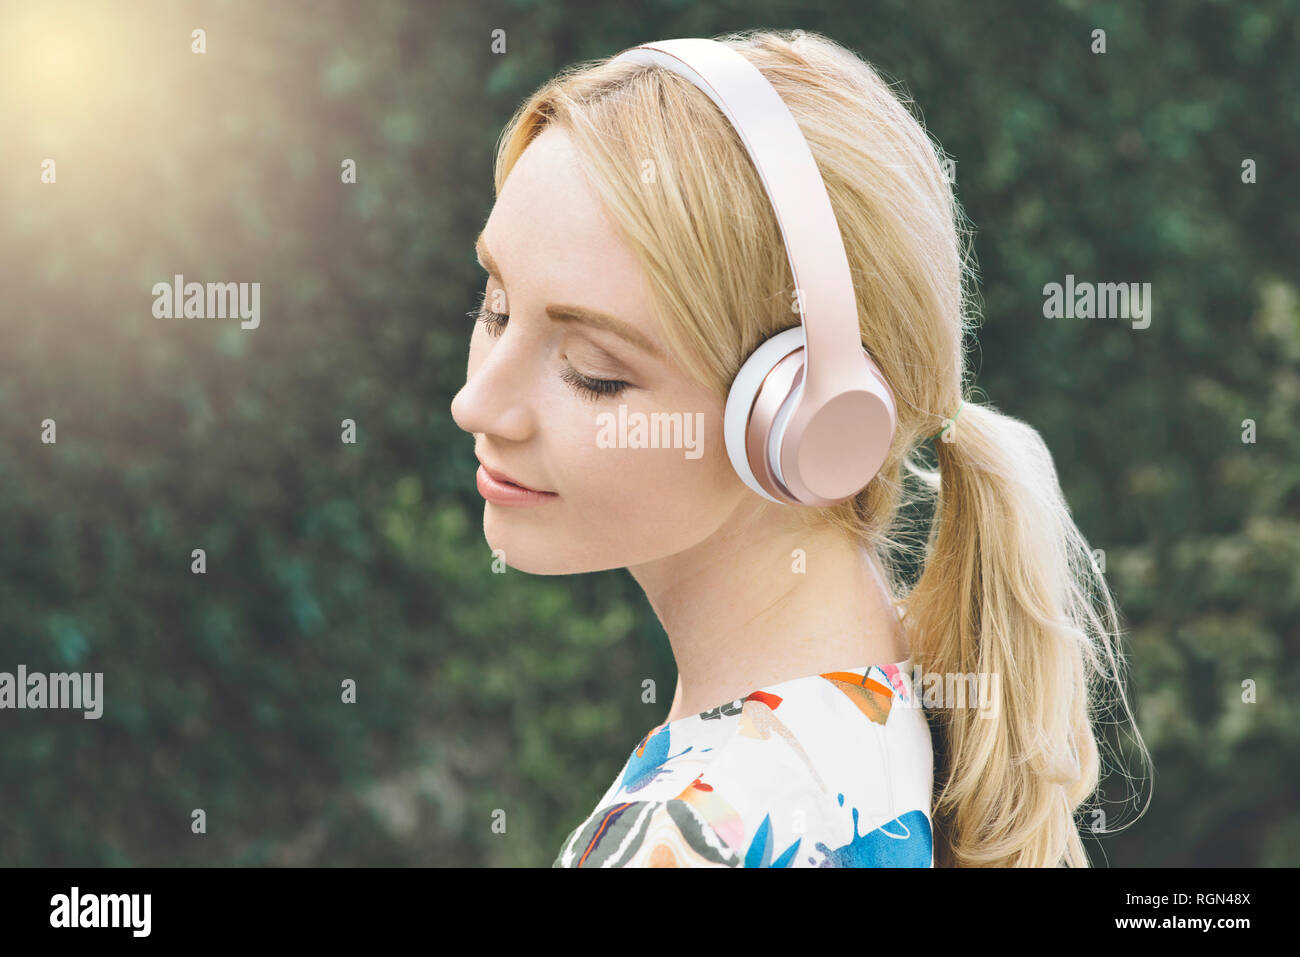 Young white woman has her eyes closed and is moved by listening to music on her headphones Stock Photo